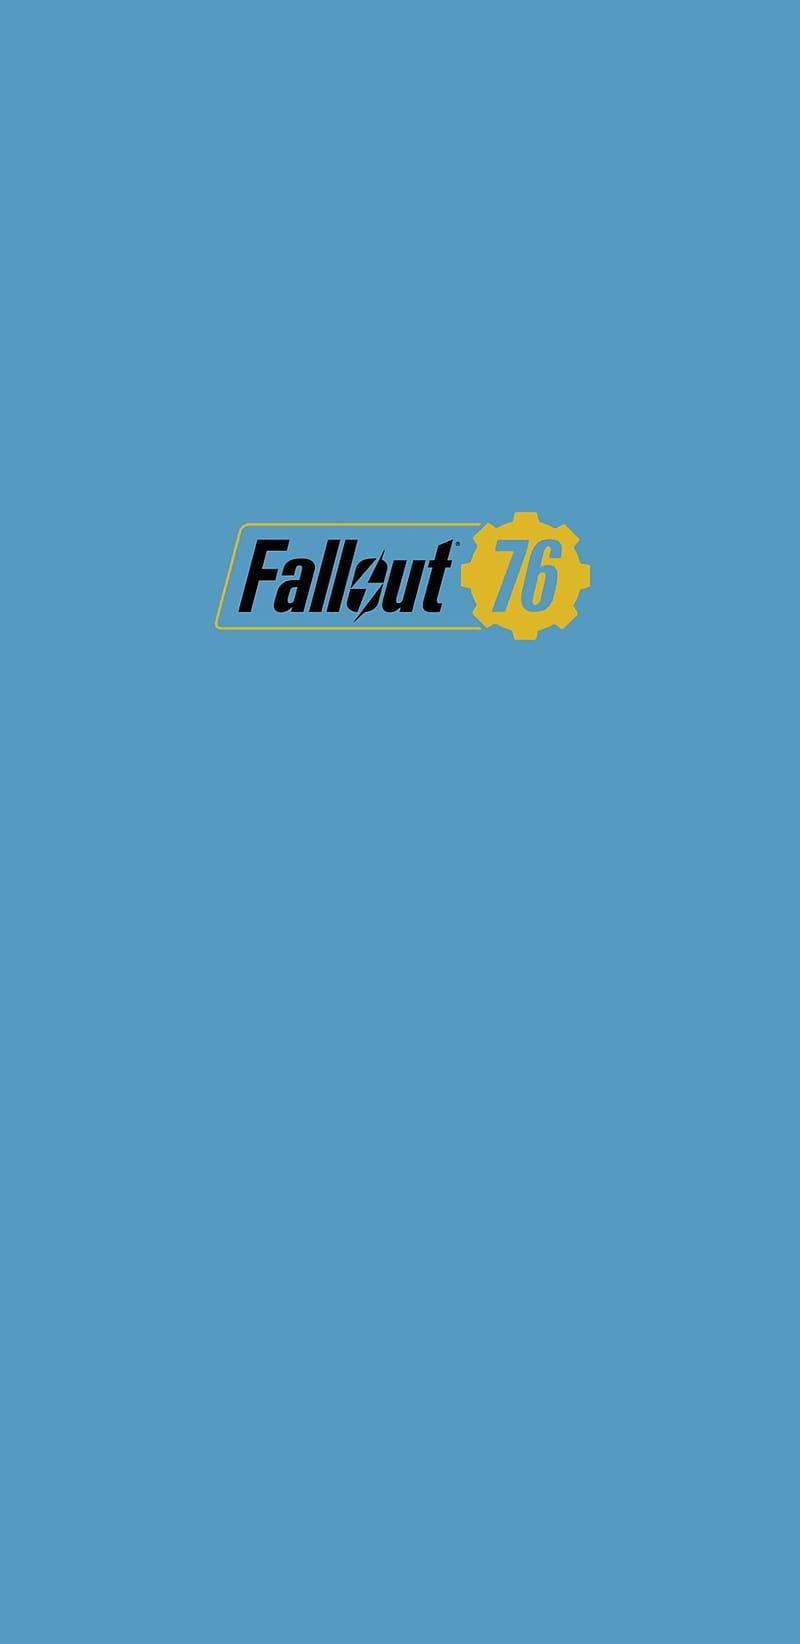 Fallout 76 Clean 2, clean, fallout, fallout 76, game, pip, steamroom ...